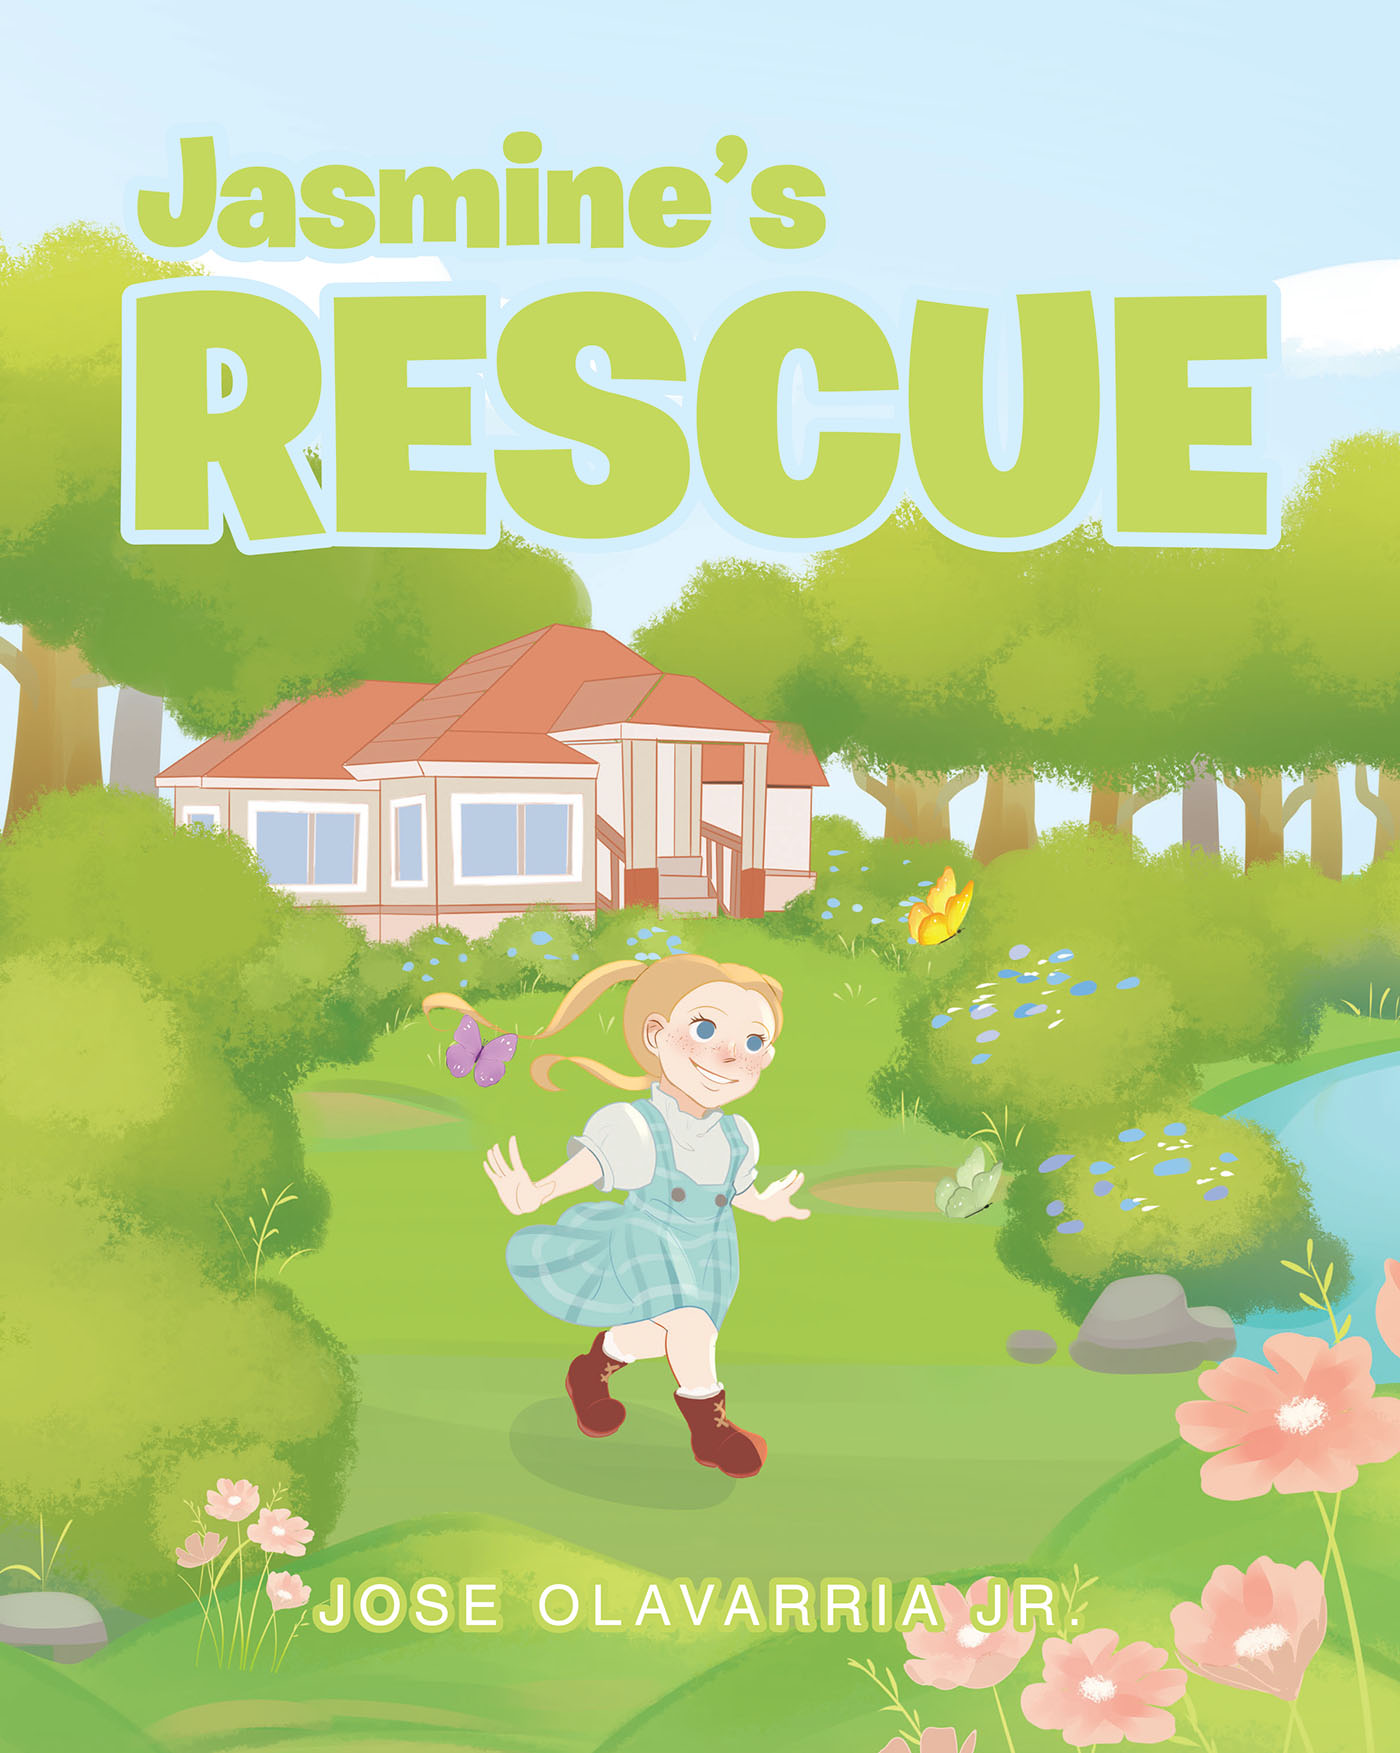 Jose Olavarria Jr.’s Newly Released "Jasmine’s Rescue" is an Enjoyable Tale of a Kindhearted Little Girl and an Important Lesson of Faith